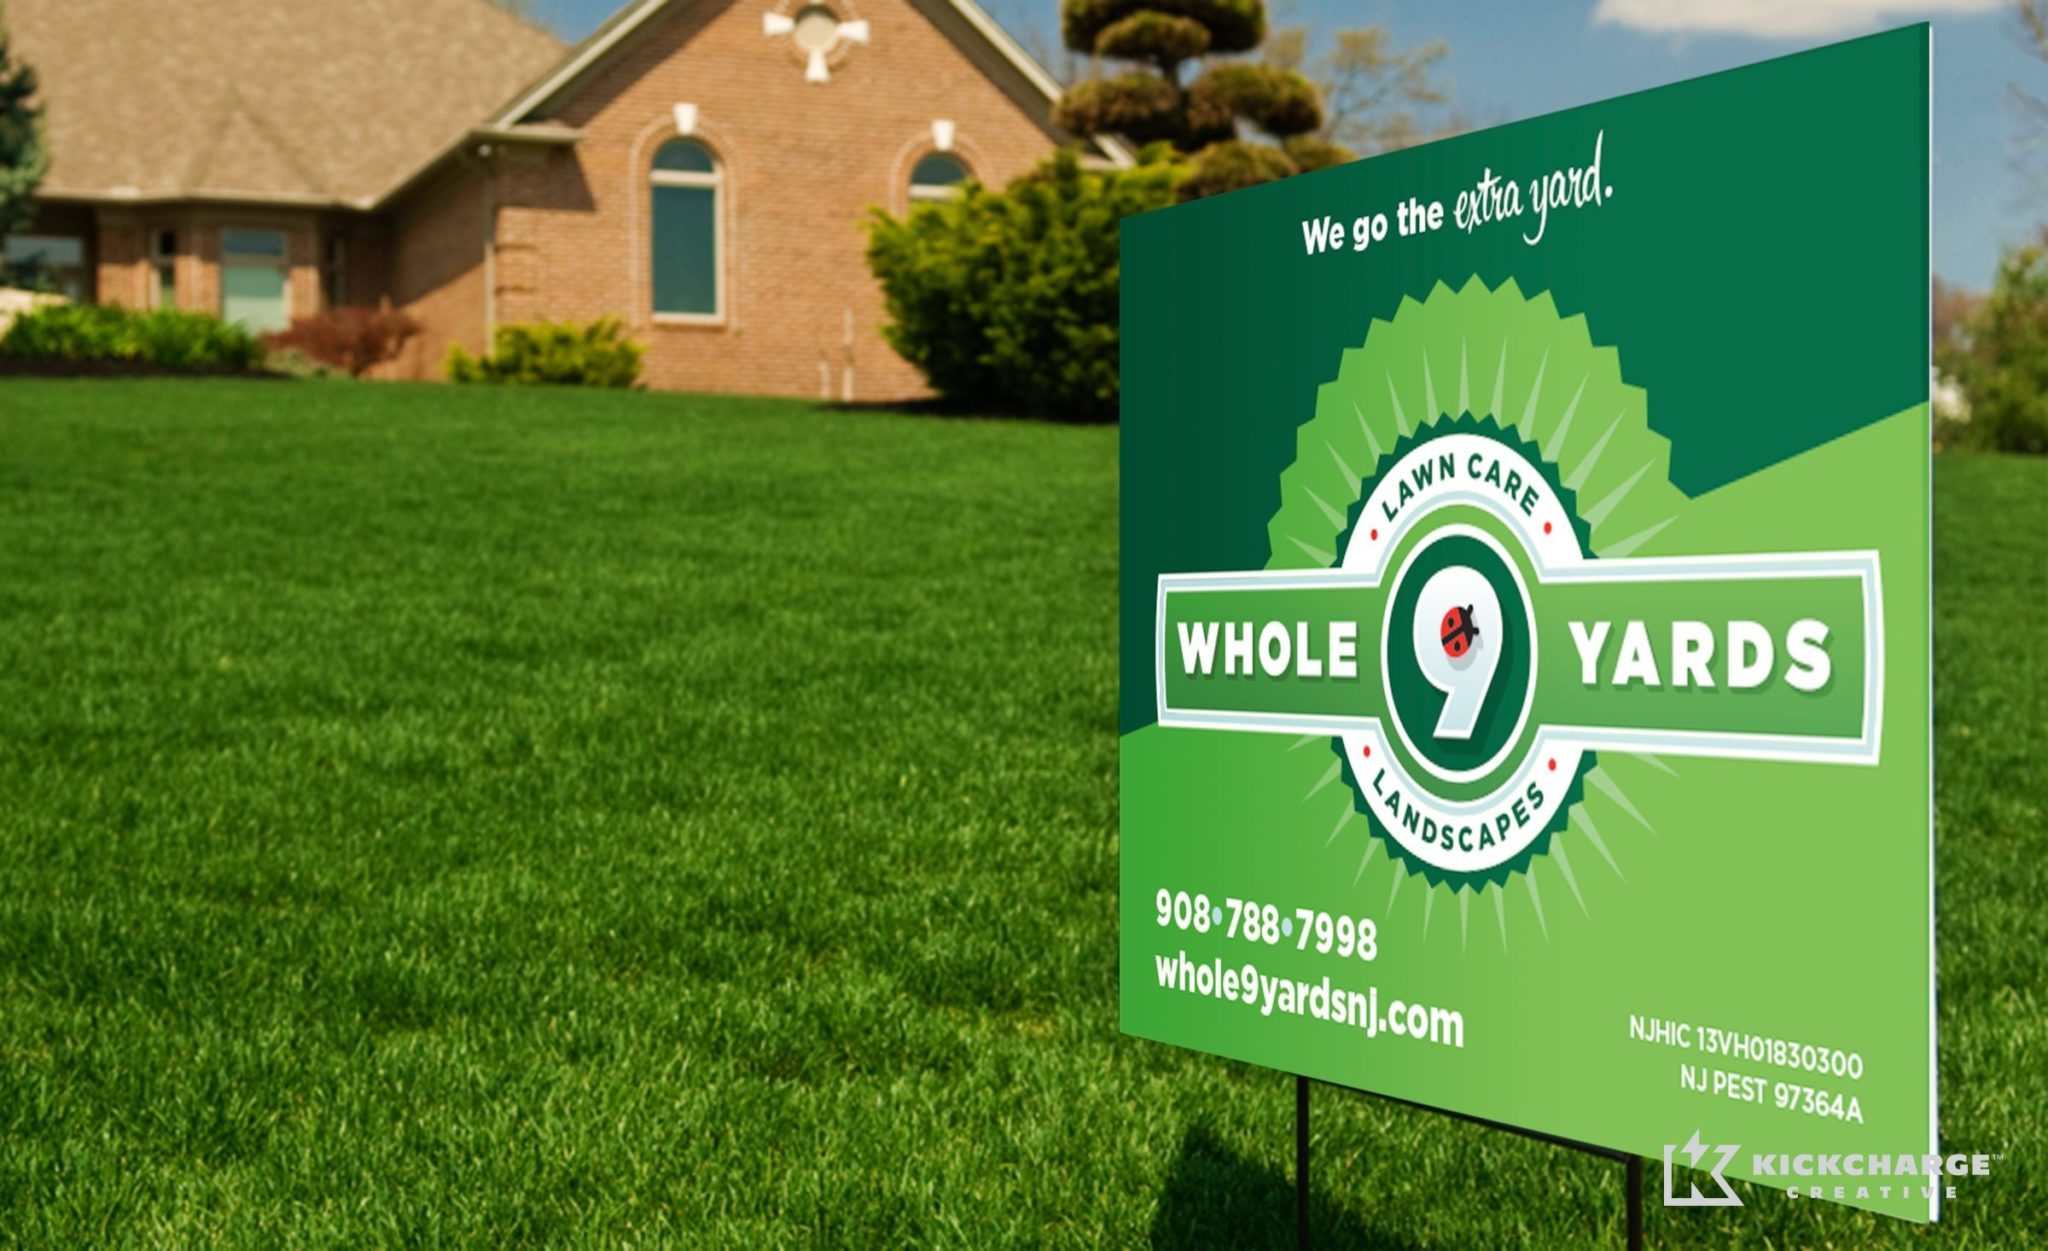 Yard sign design for Whole 9 Yards Lawn Care and Landscaping serving Flemington, New Jersey.